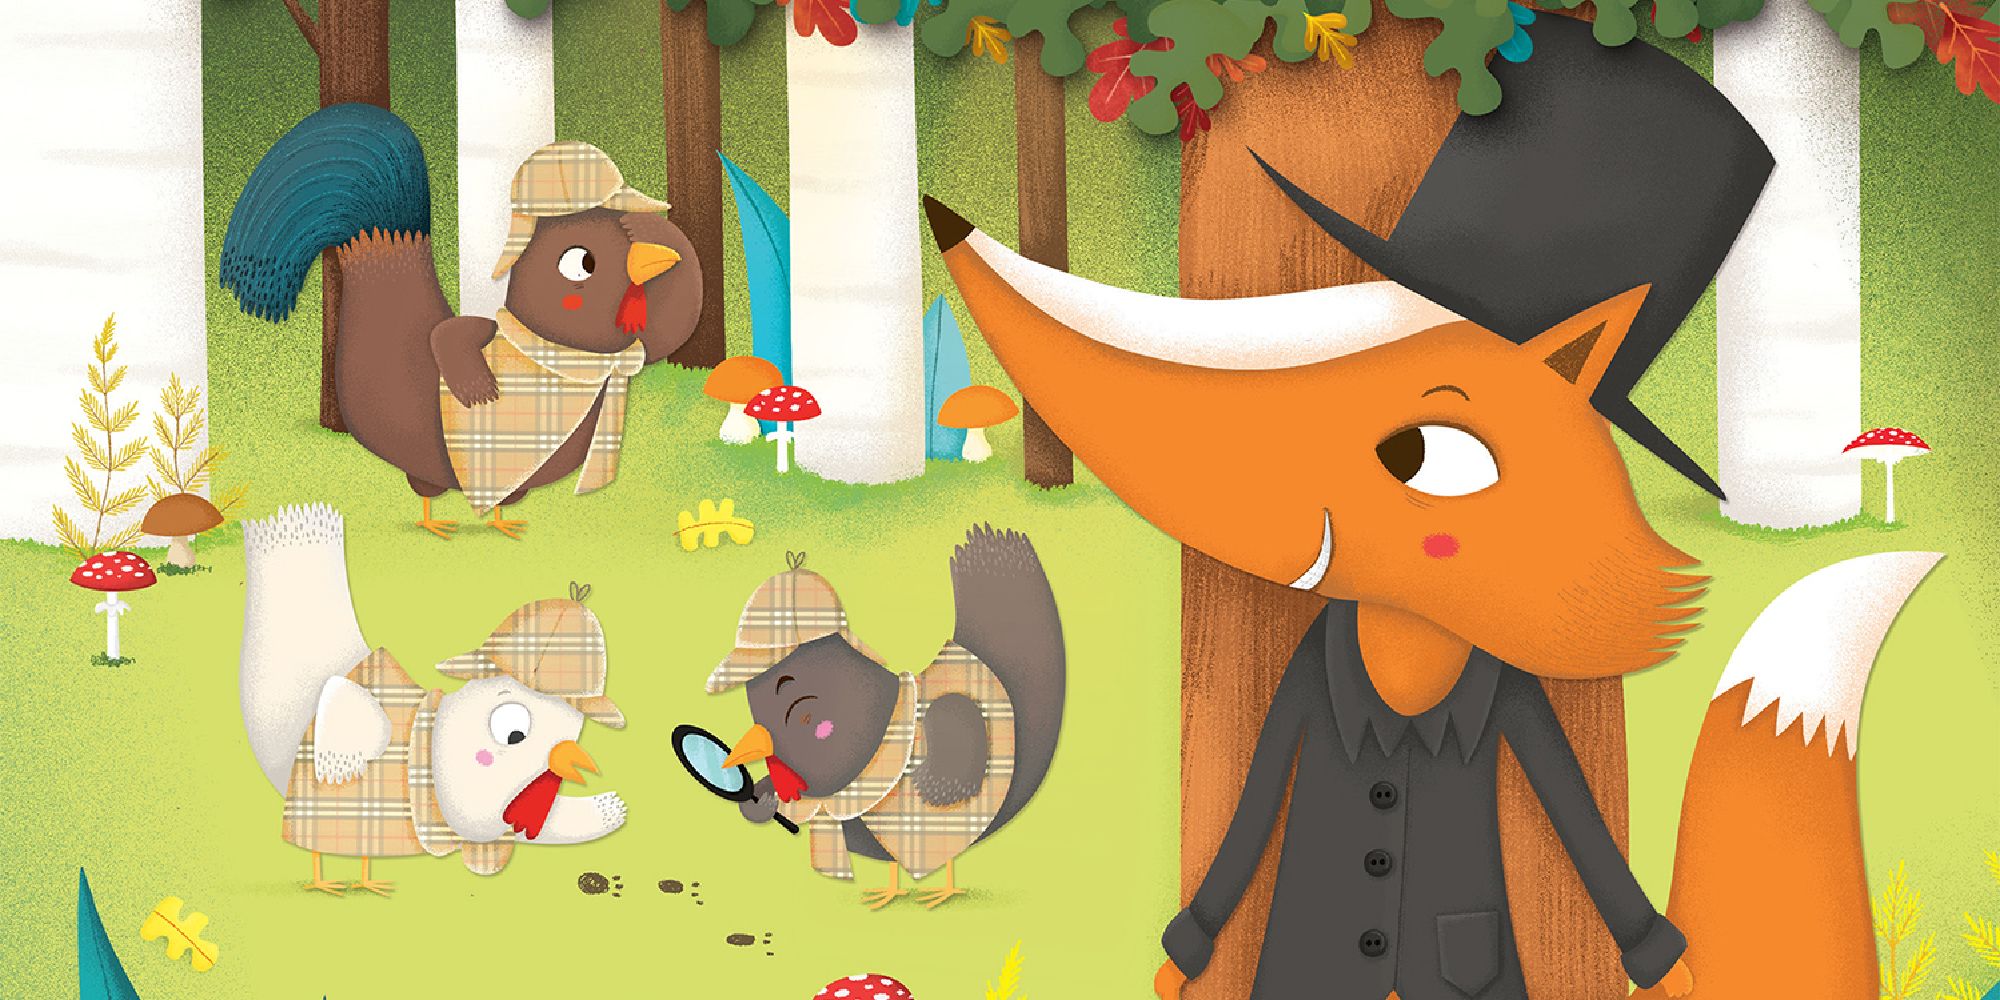 The box art for Outfoxed, showing a sneaky fox hiding behind a tree while chicken detectives snoop around